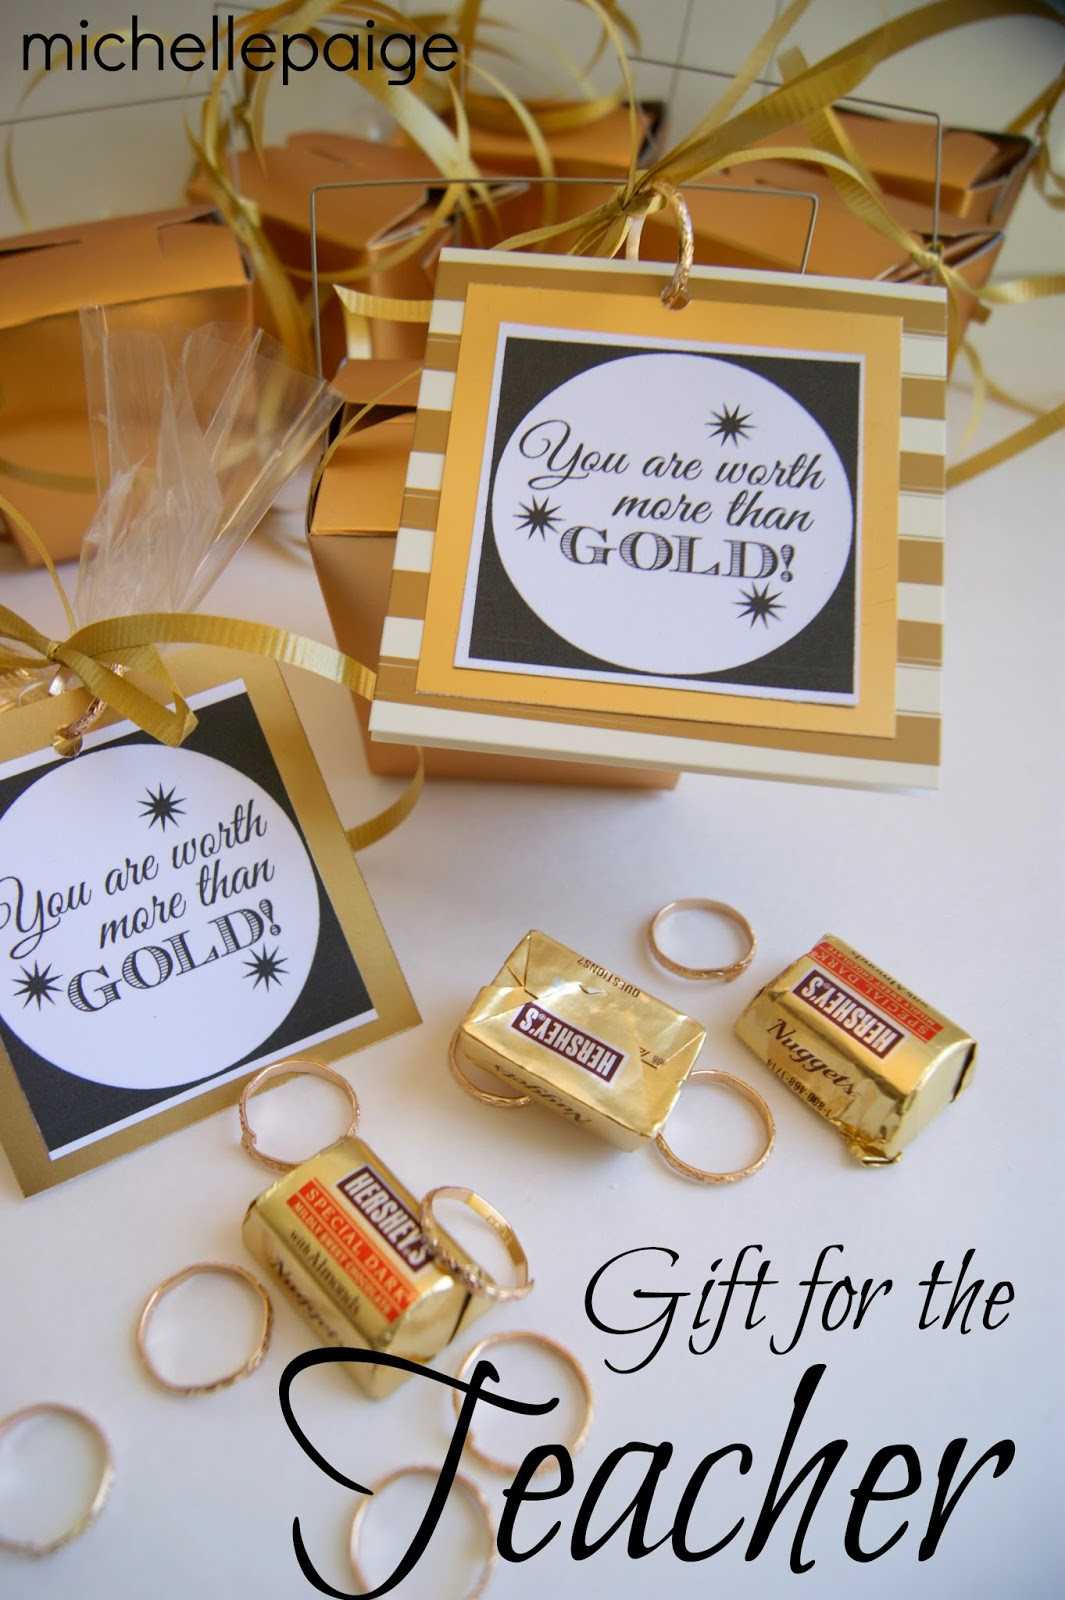 Thank You For Your Service Gift Ideas
 michelle paige blogs Worth More than Gold Teacher